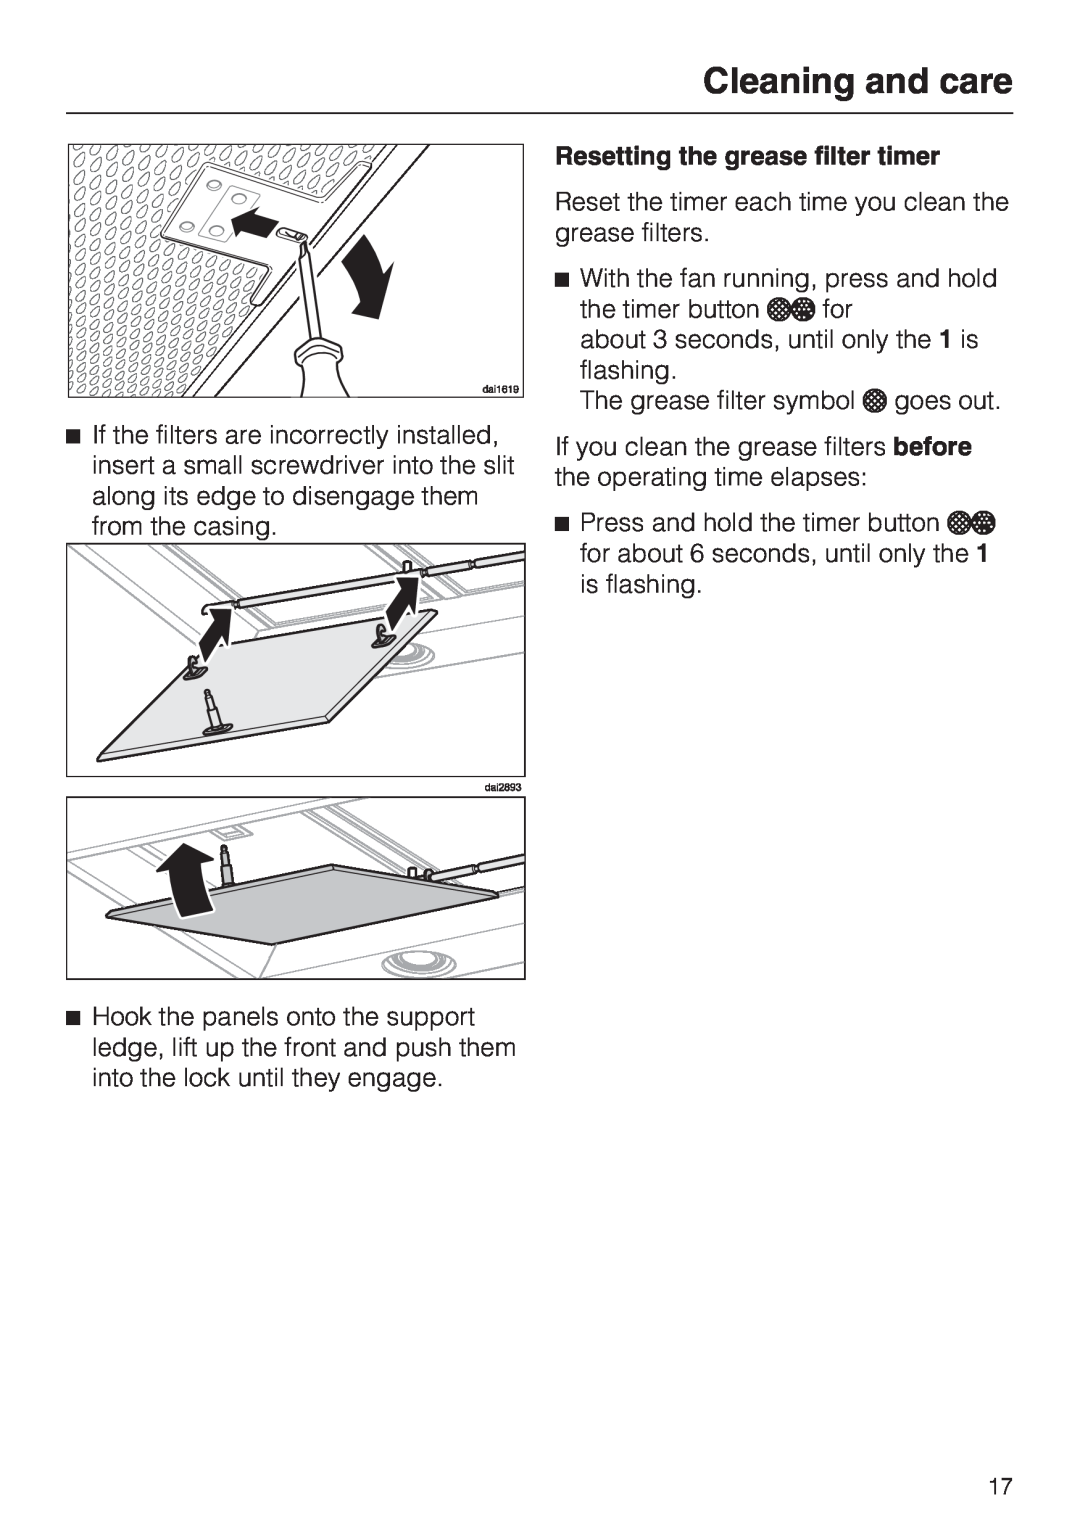 Miele DA 6590 D installation instructions Resetting the grease filter timer, Cleaning and care 